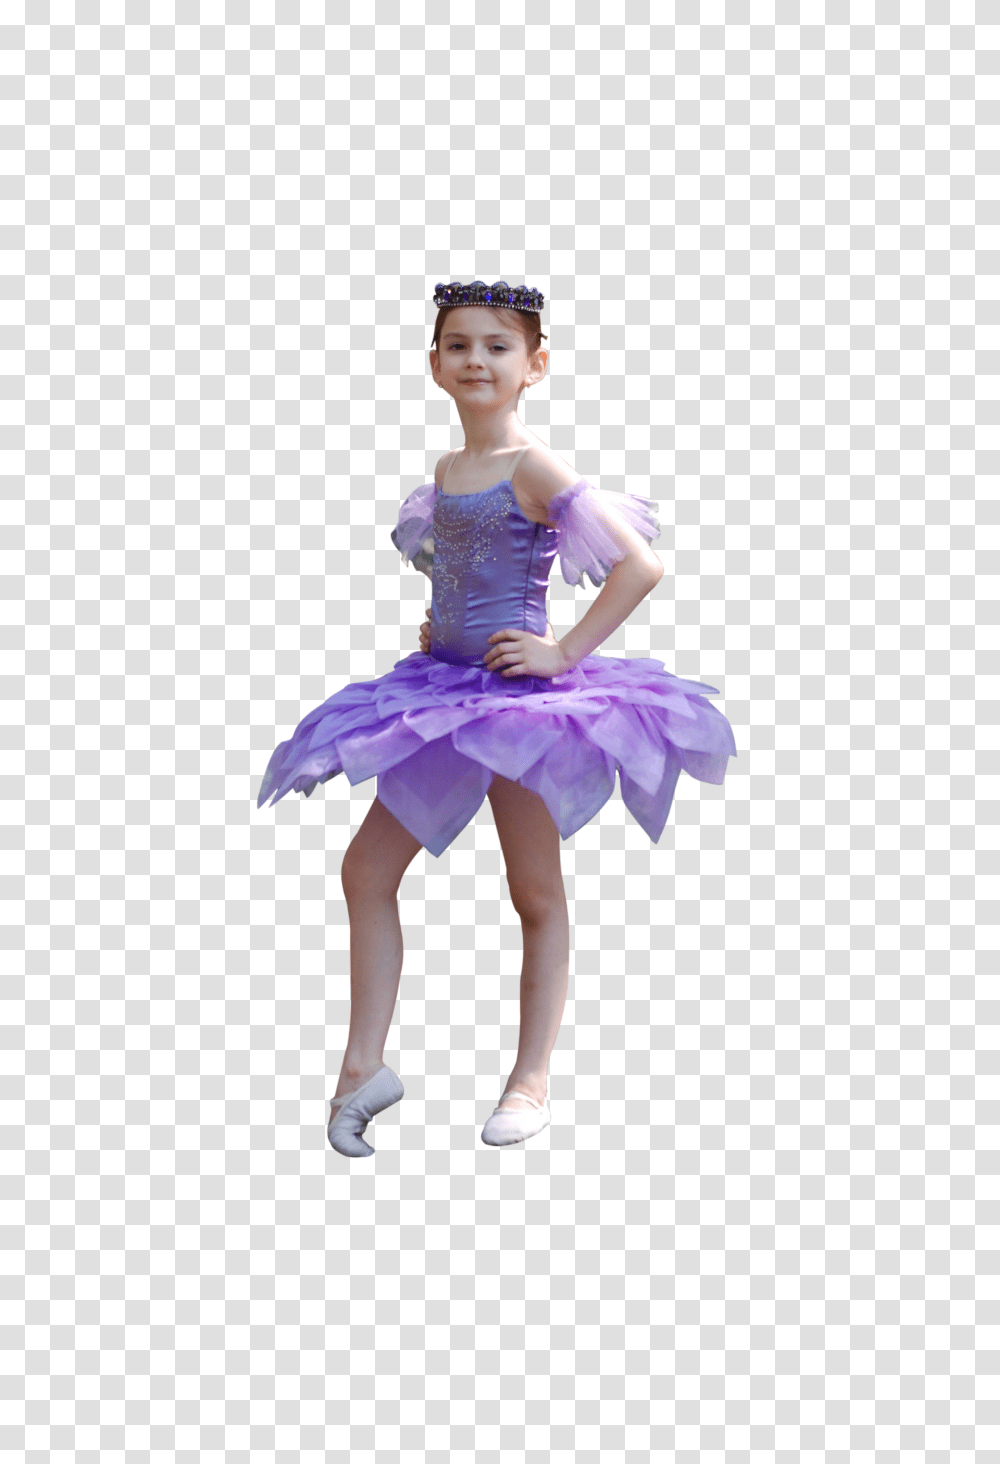 Dance, Dancing, Couple, Arts, Show, People, Pngs, Person, Skirt, Dance Pose Transparent Png